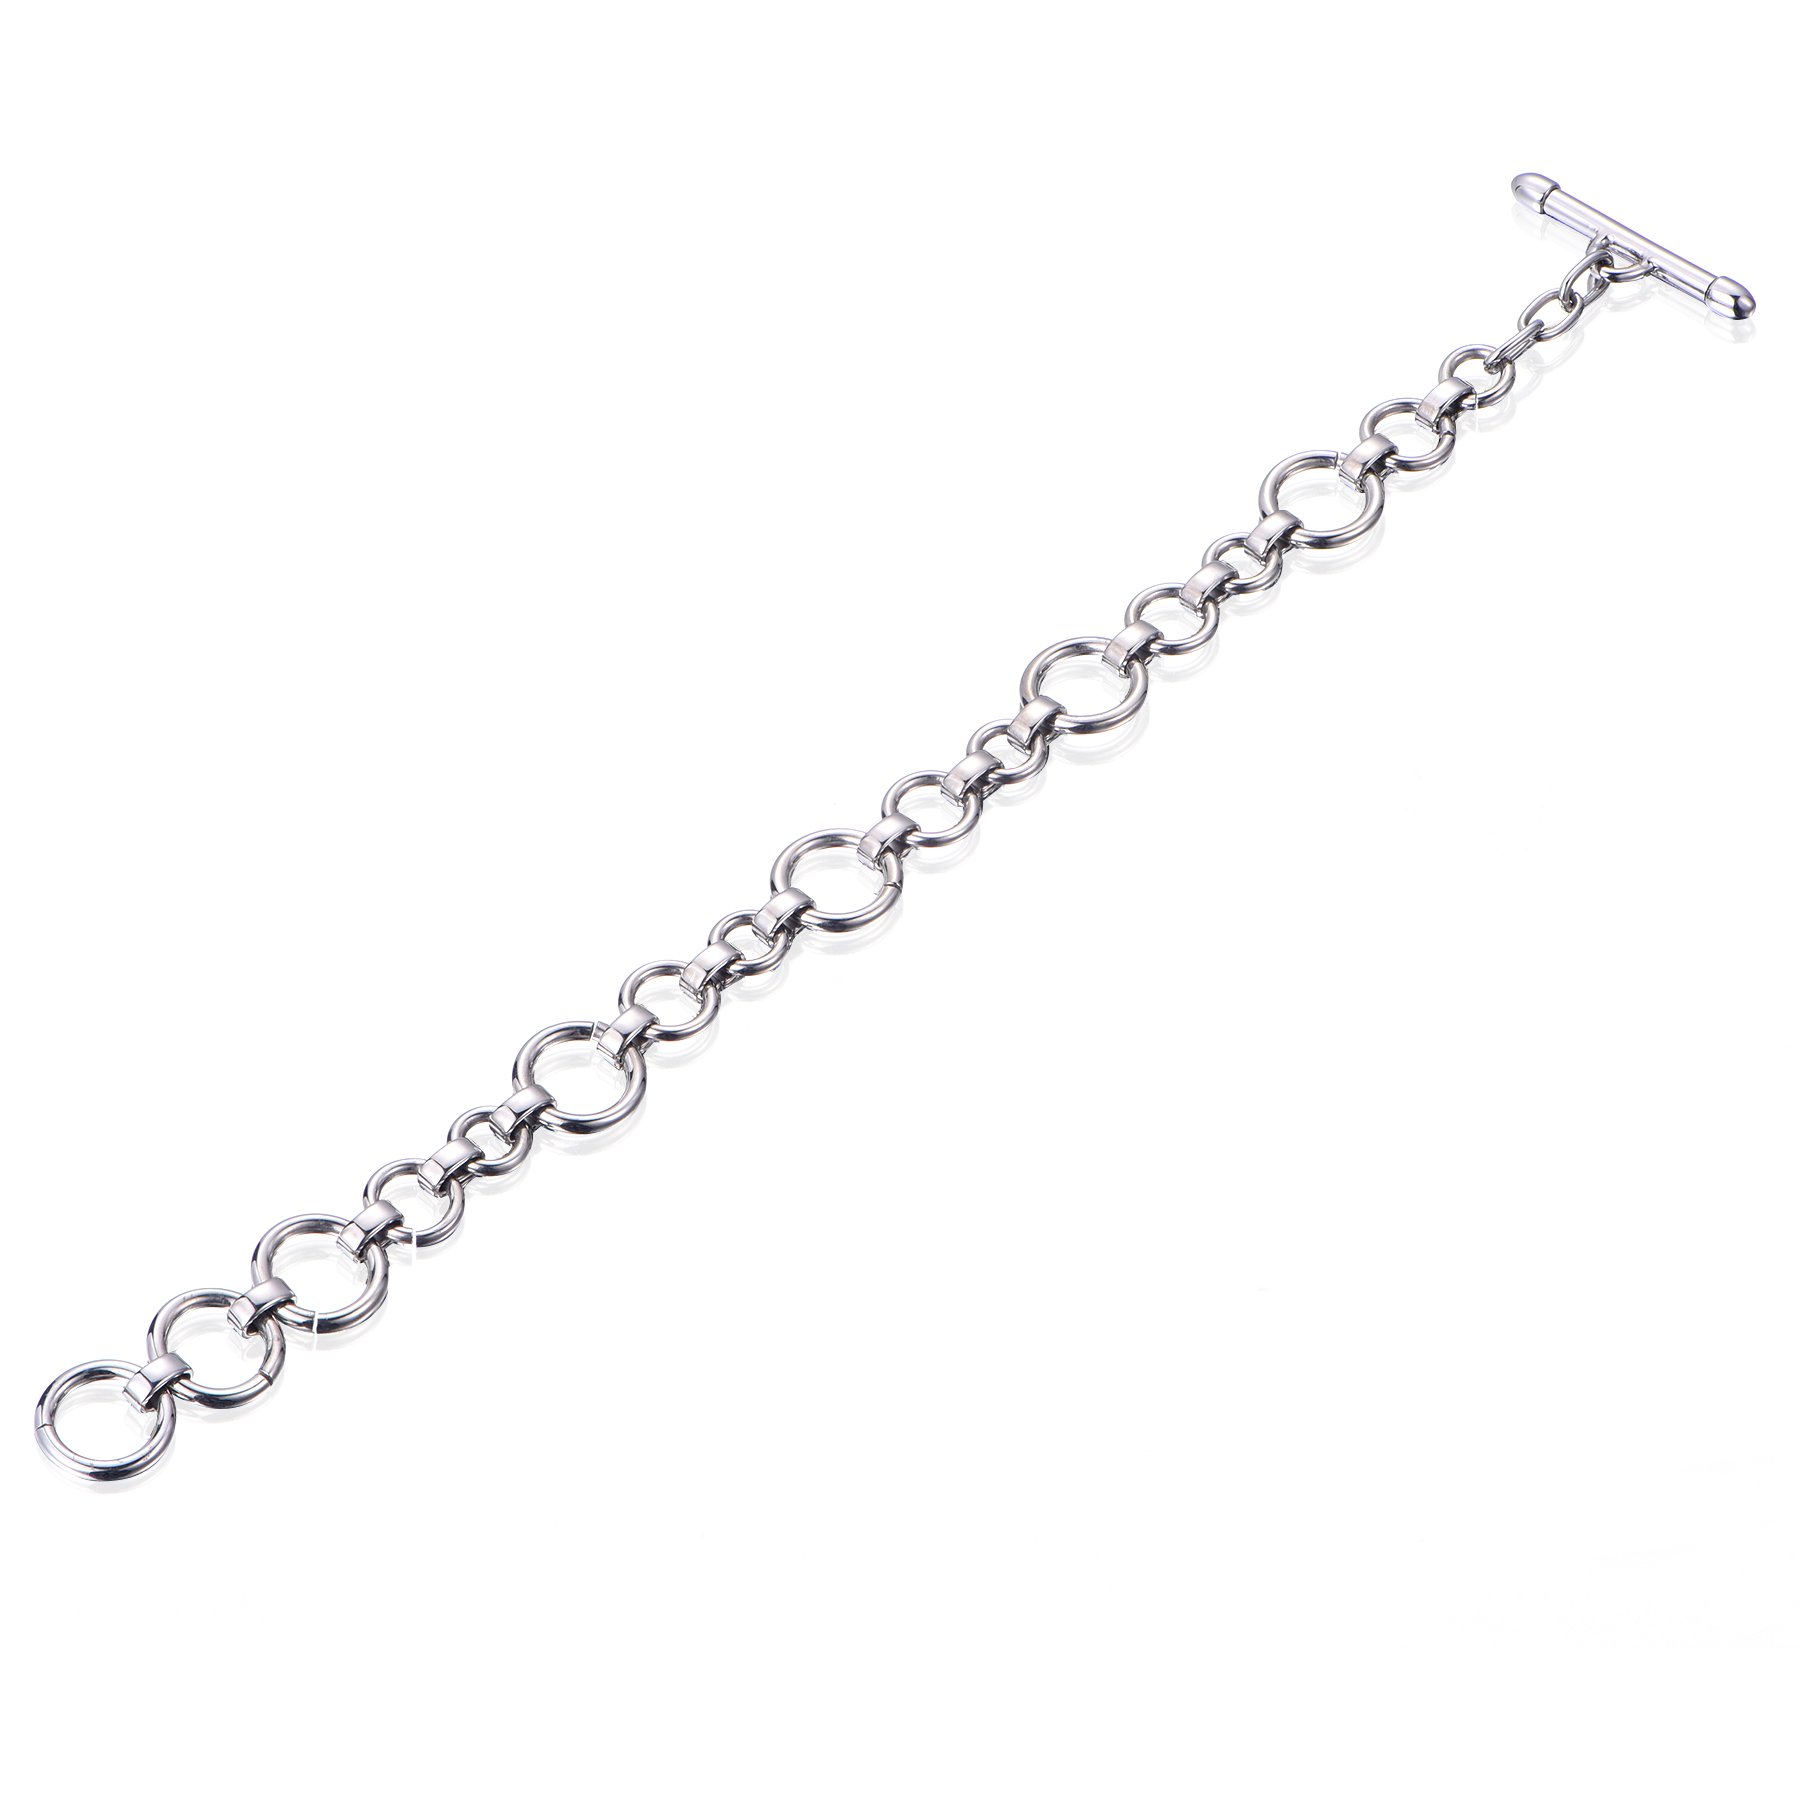 Unique High Quality Stainless Steel Handmade Bracelet BS10-02